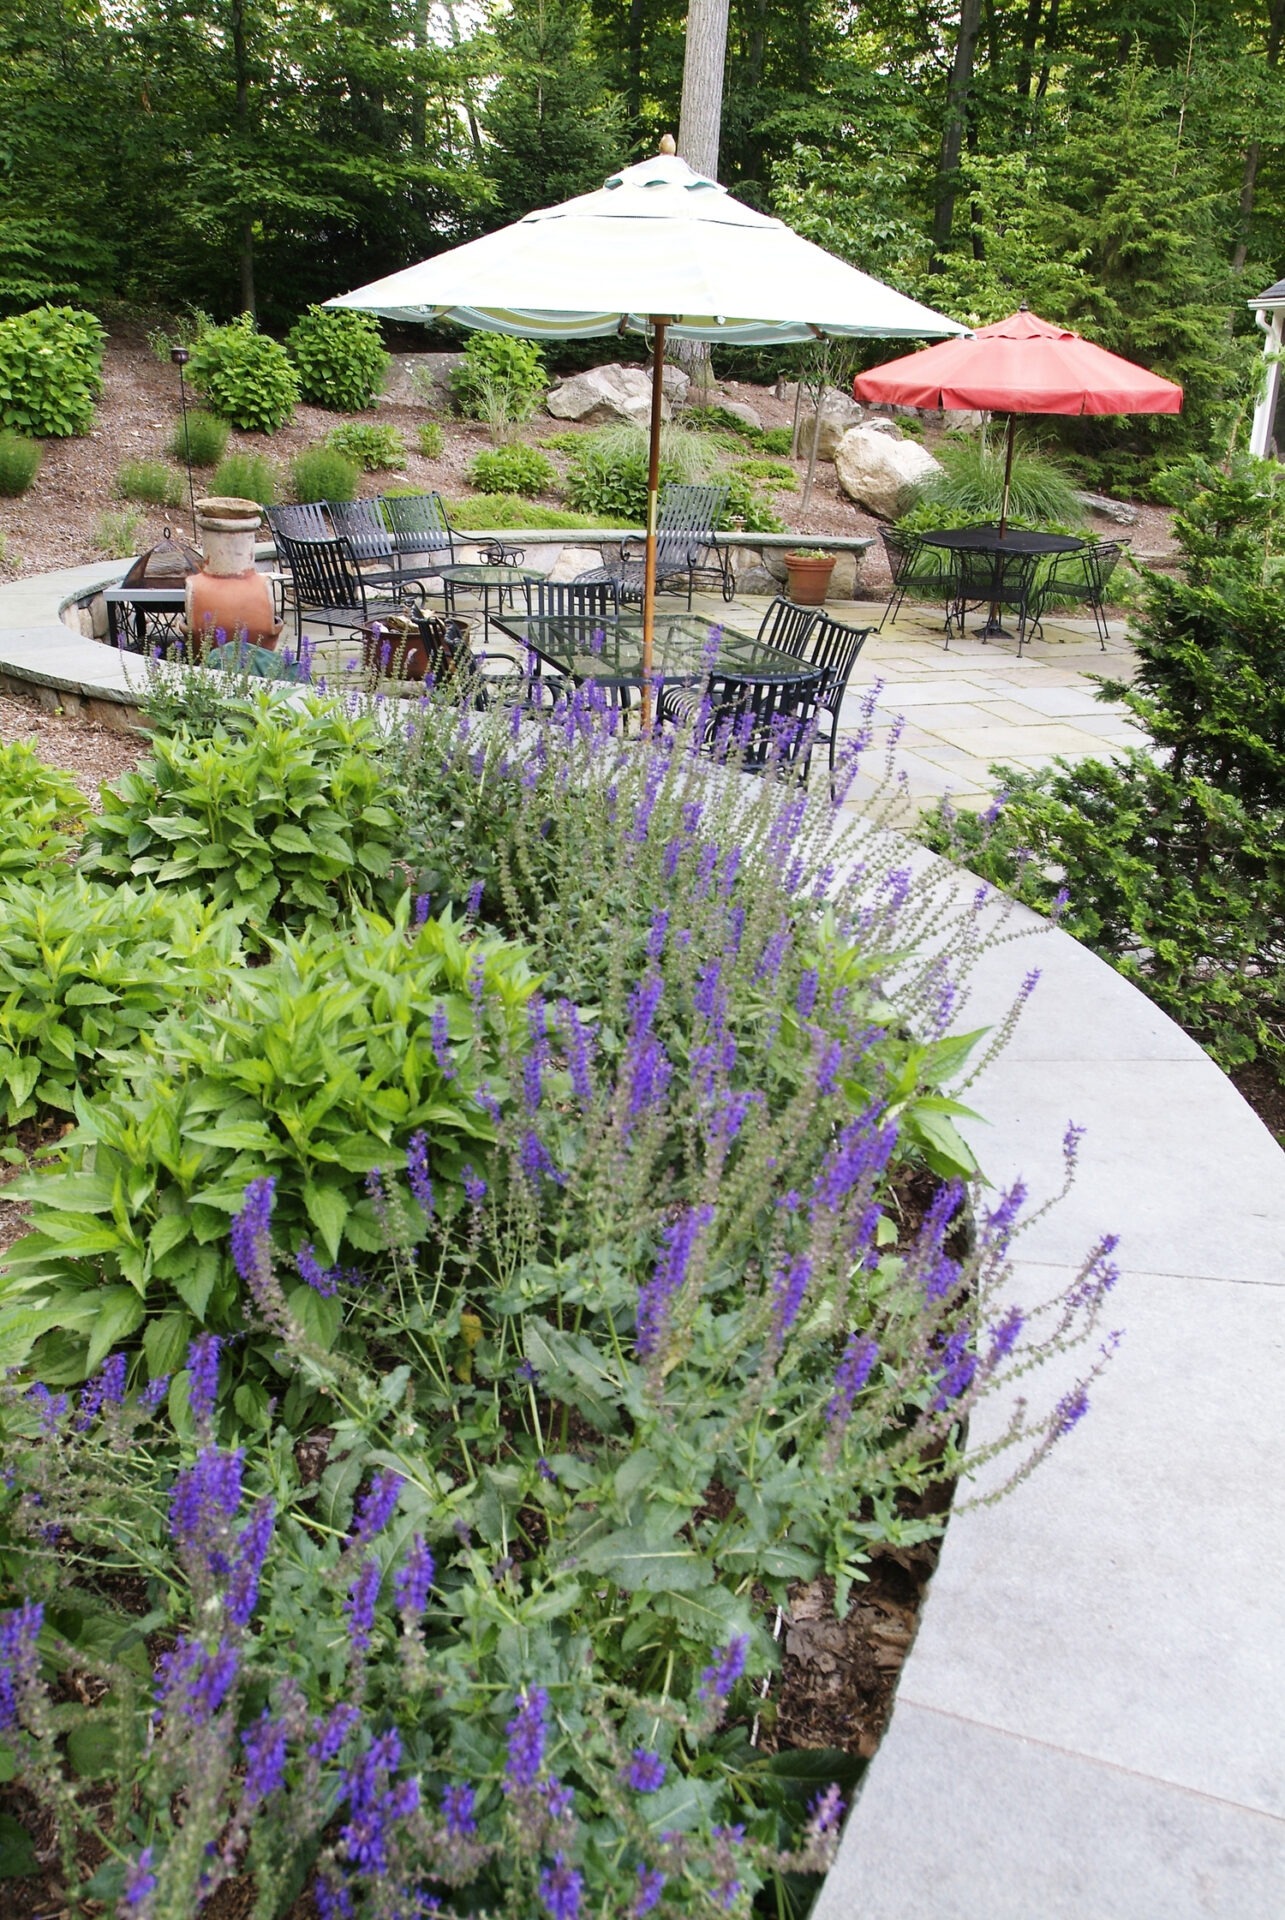 An outdoor patio area with purple flowers in the foreground, surrounded by greenery, featuring a seating area with umbrellas and metal furniture.